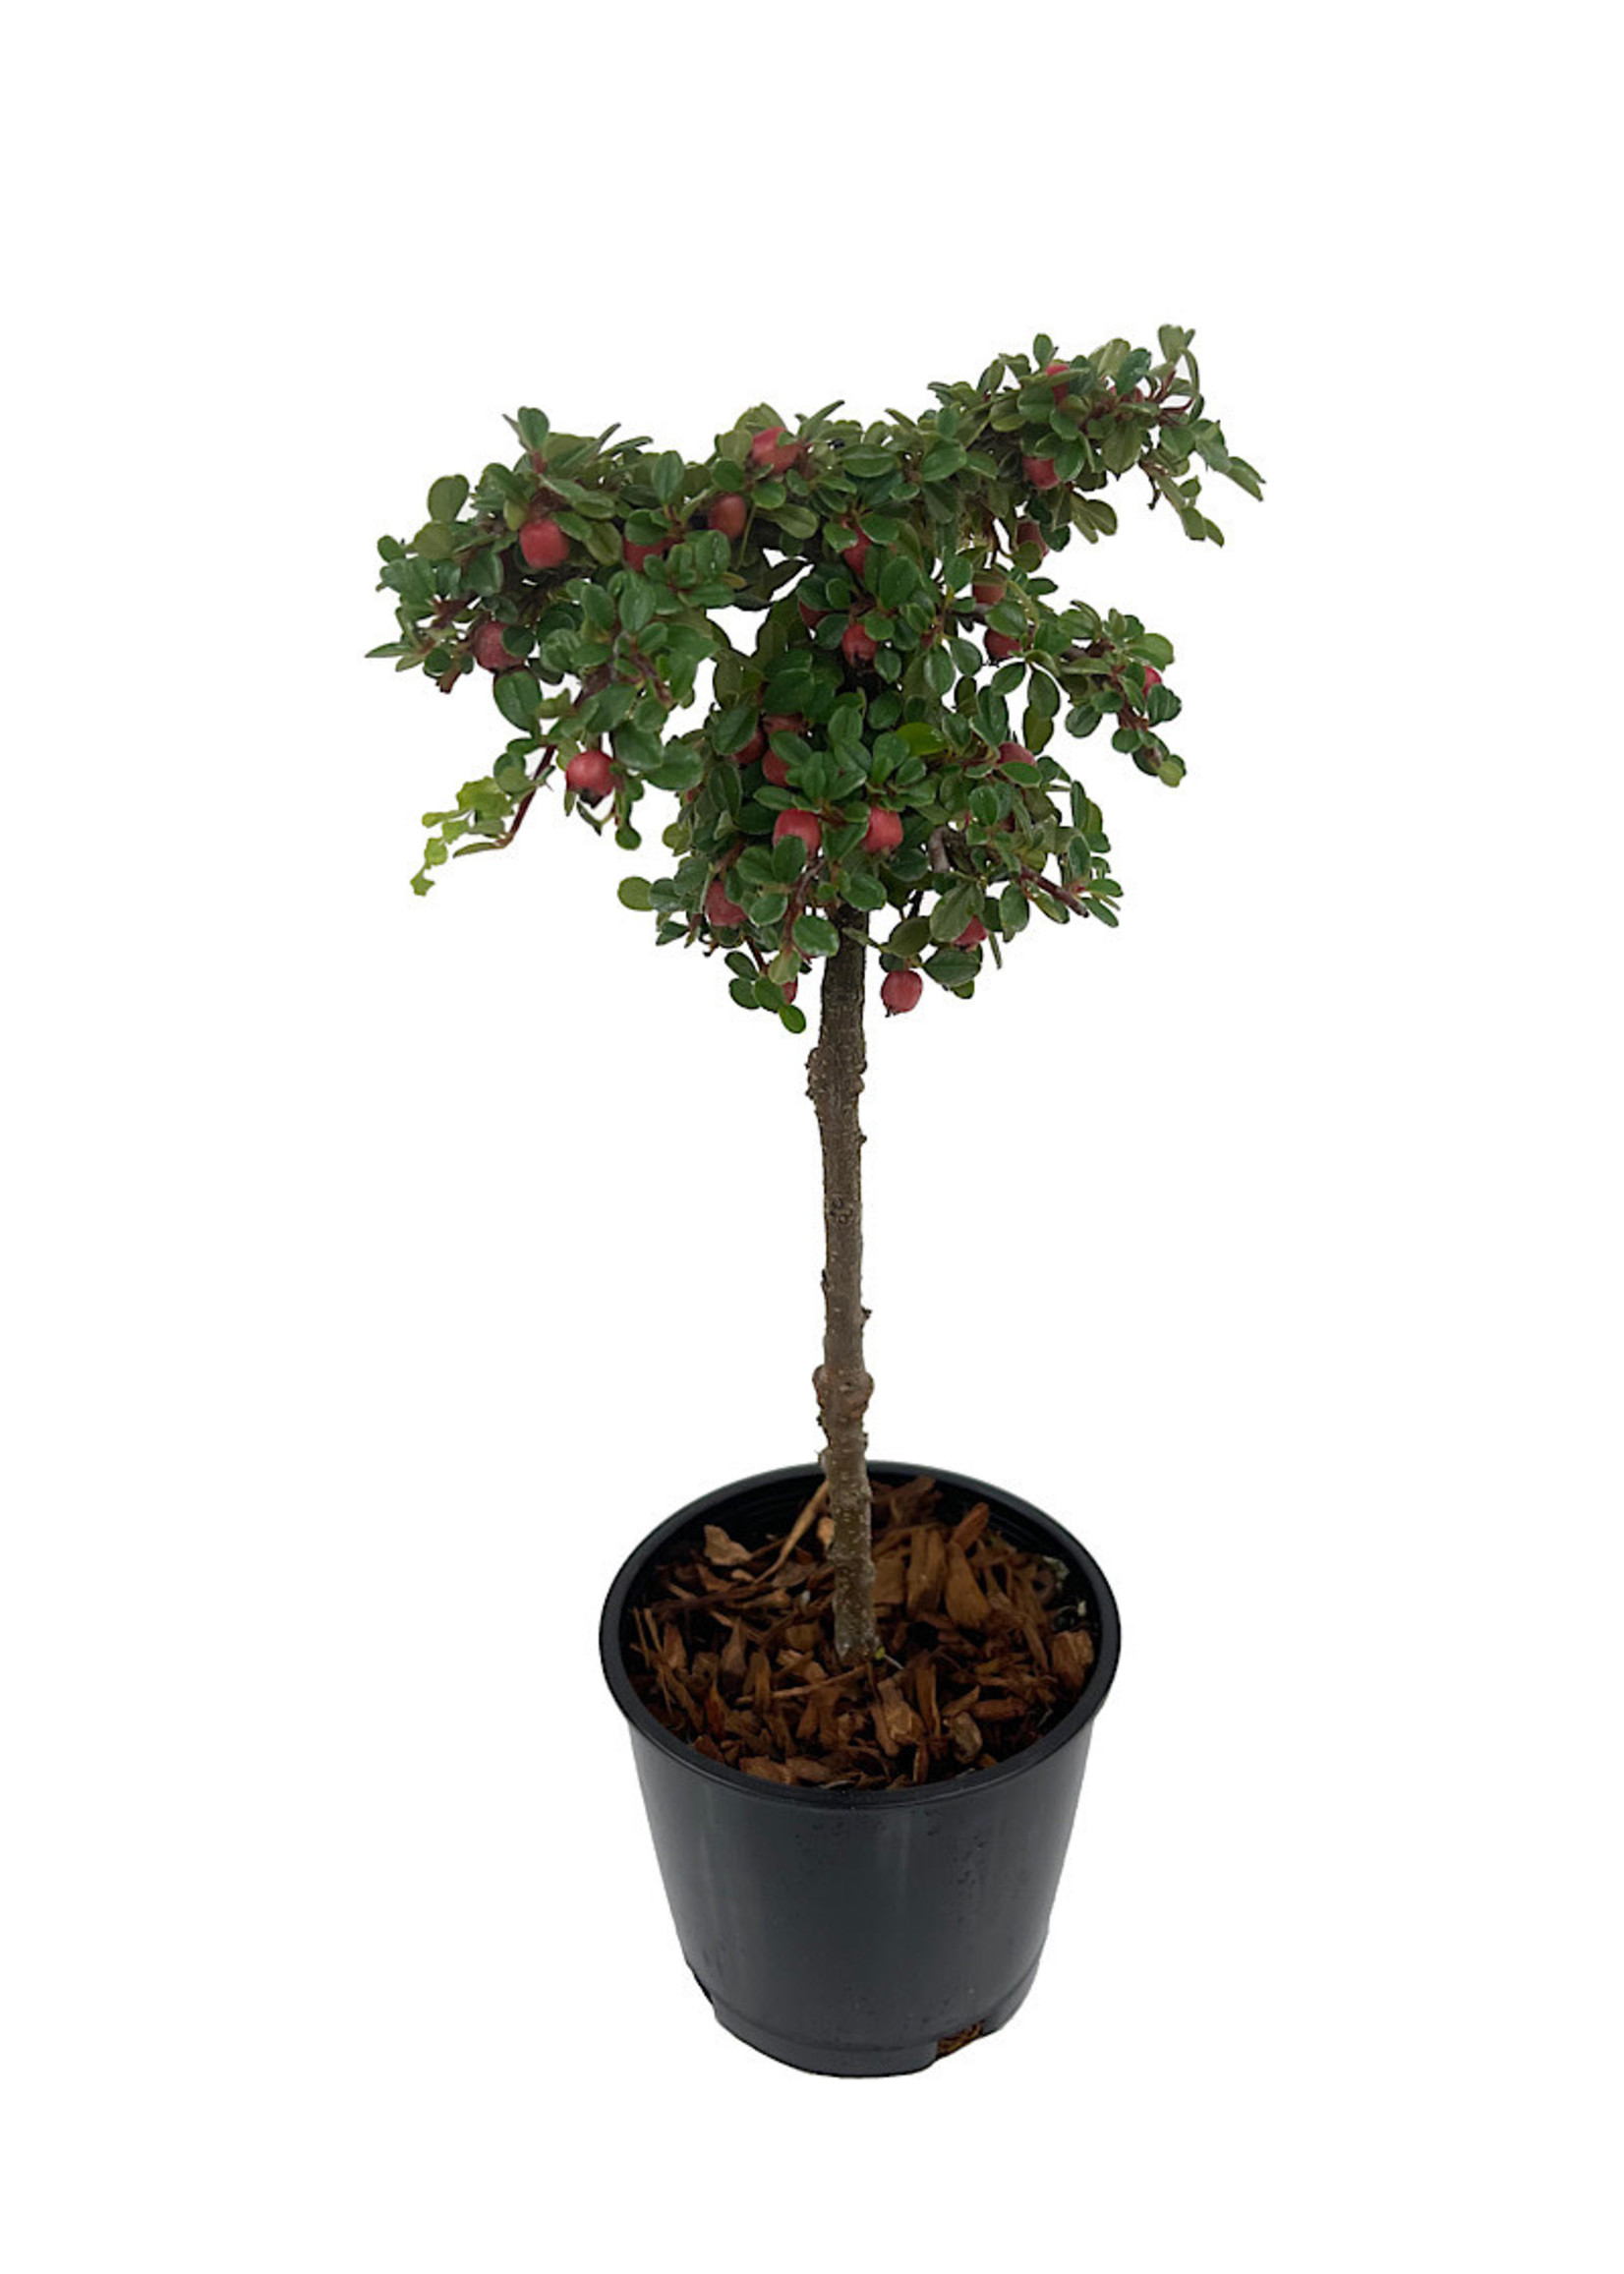 Cotoneaster dammeri 'Strieb's Findling' Topiary Ball 4 Inch